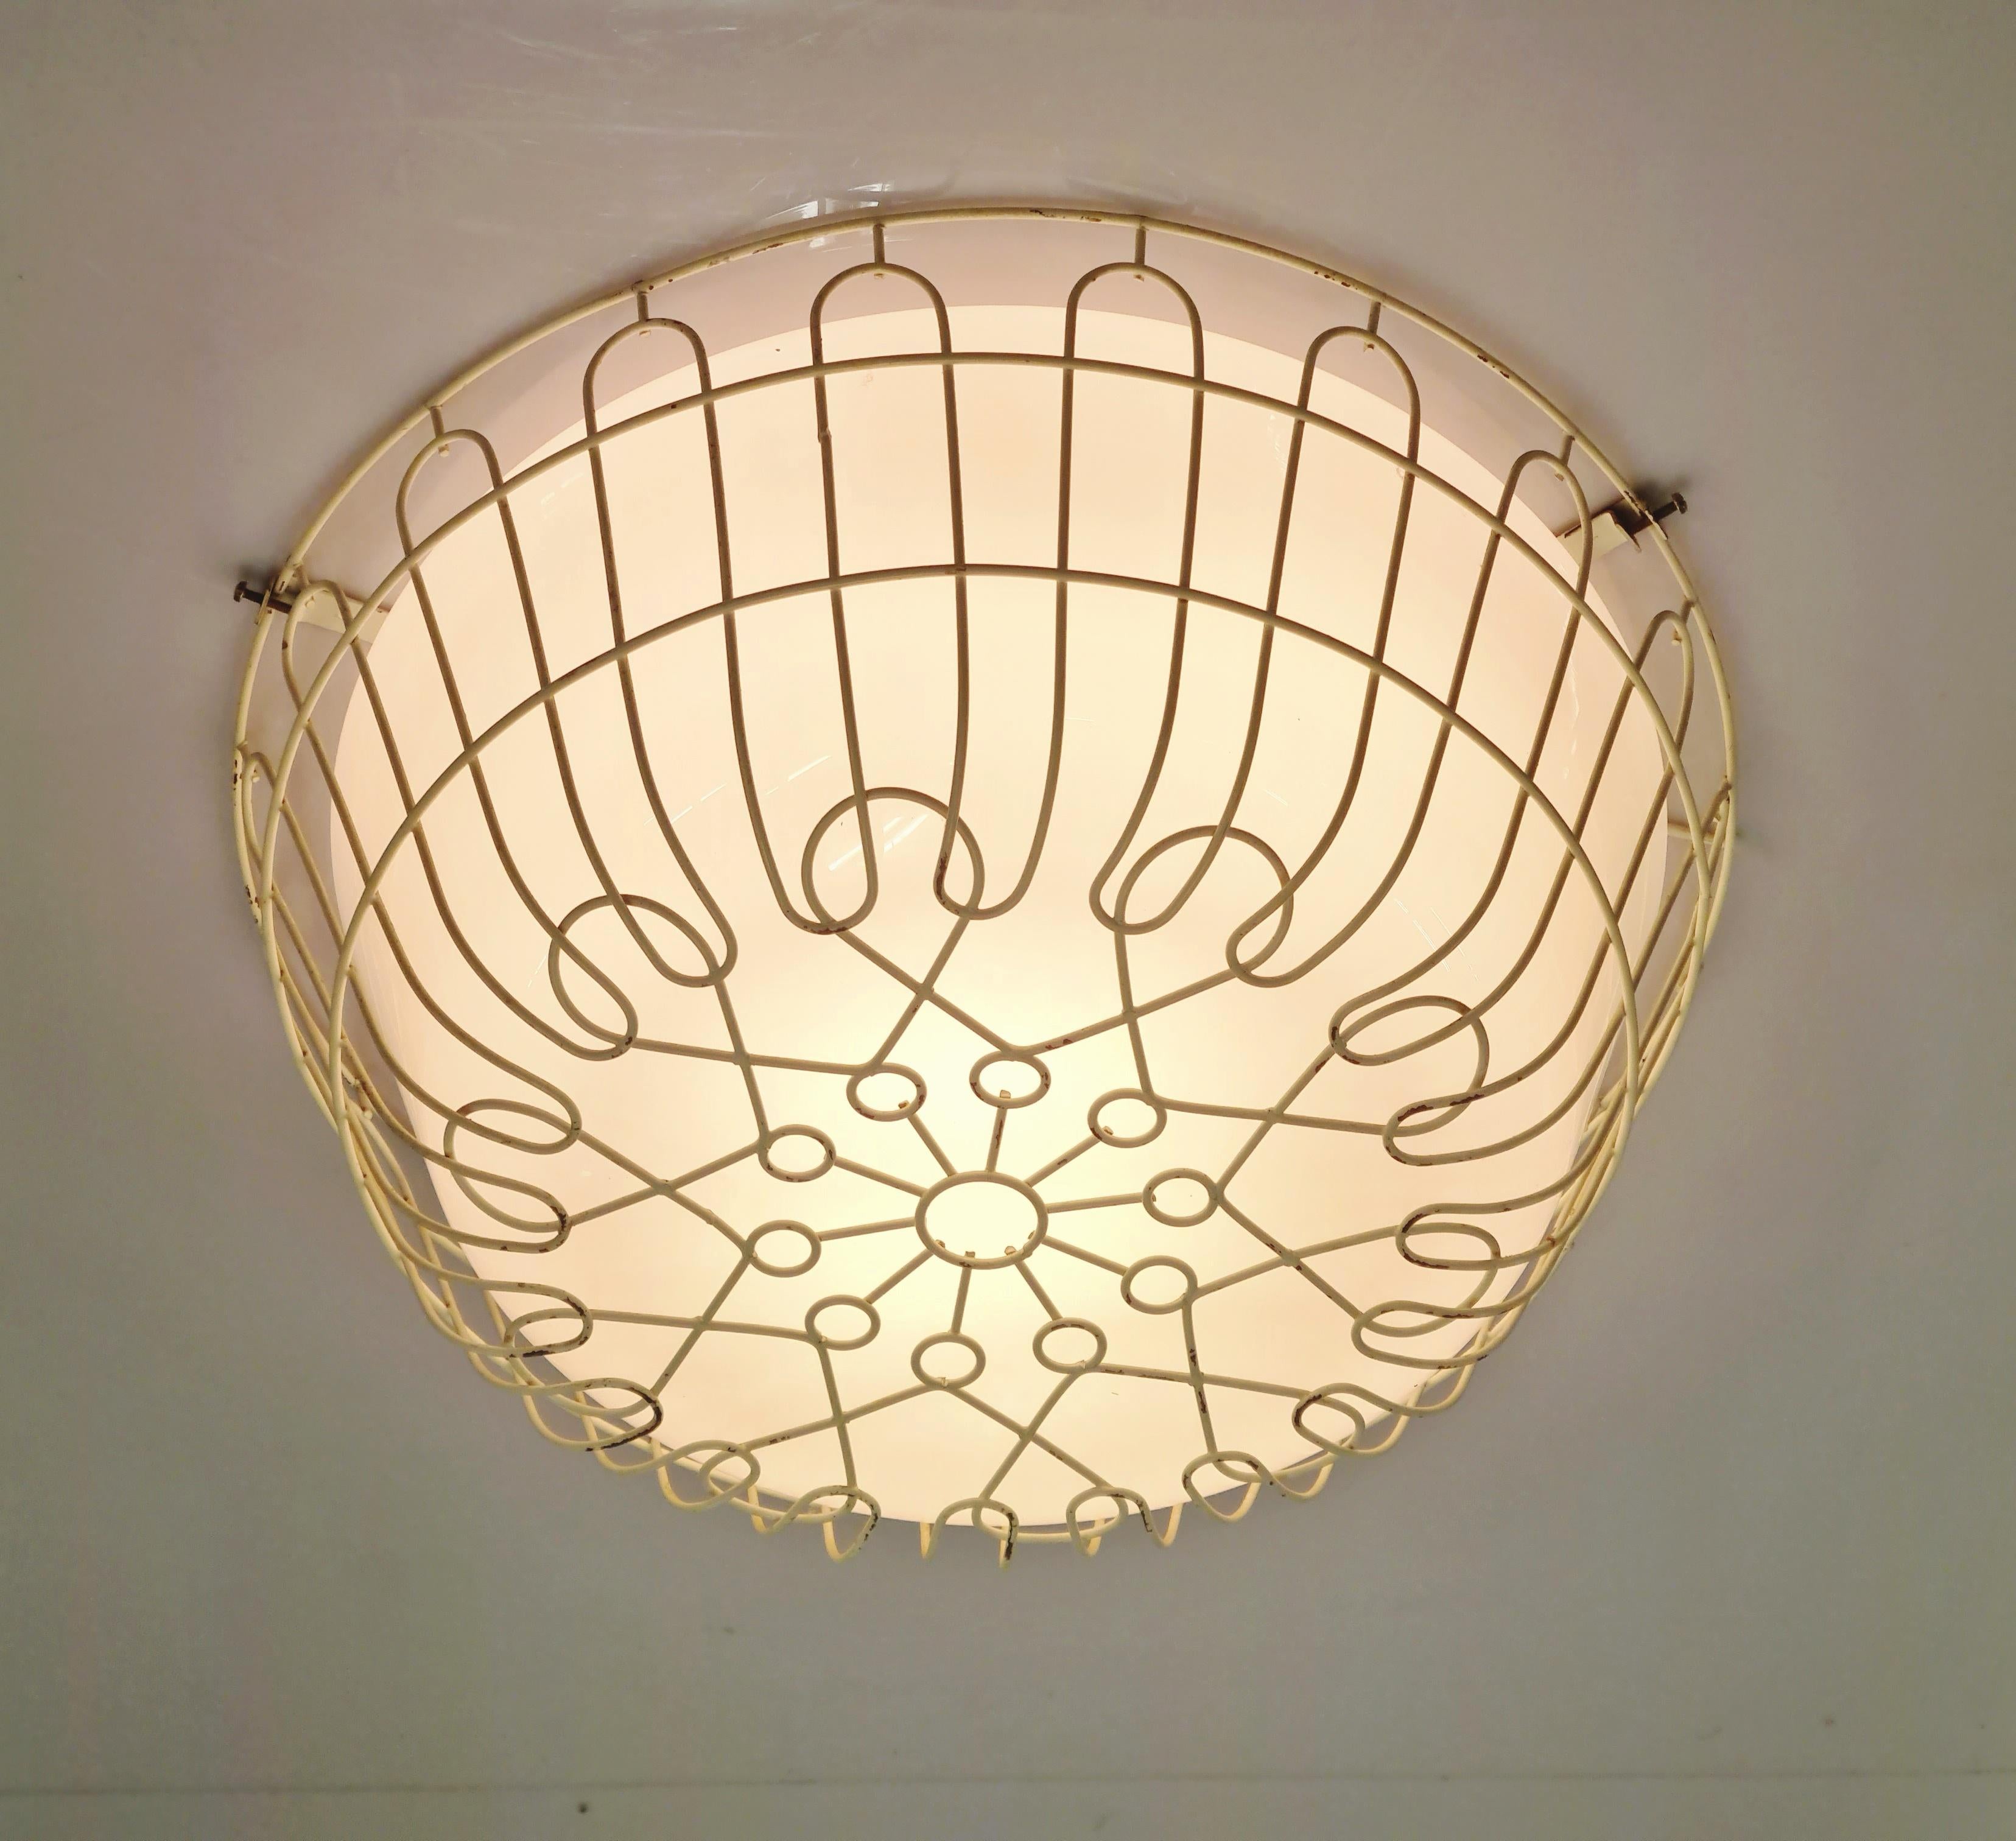 A rare and beautiful ceiling lamp by Finnish designer Lisa Johansson-Papé from the 1950s. An absolute gem harmoniously combining esthetics and functionality. This lamp design was originally intended for spaces with rough activities with the idea